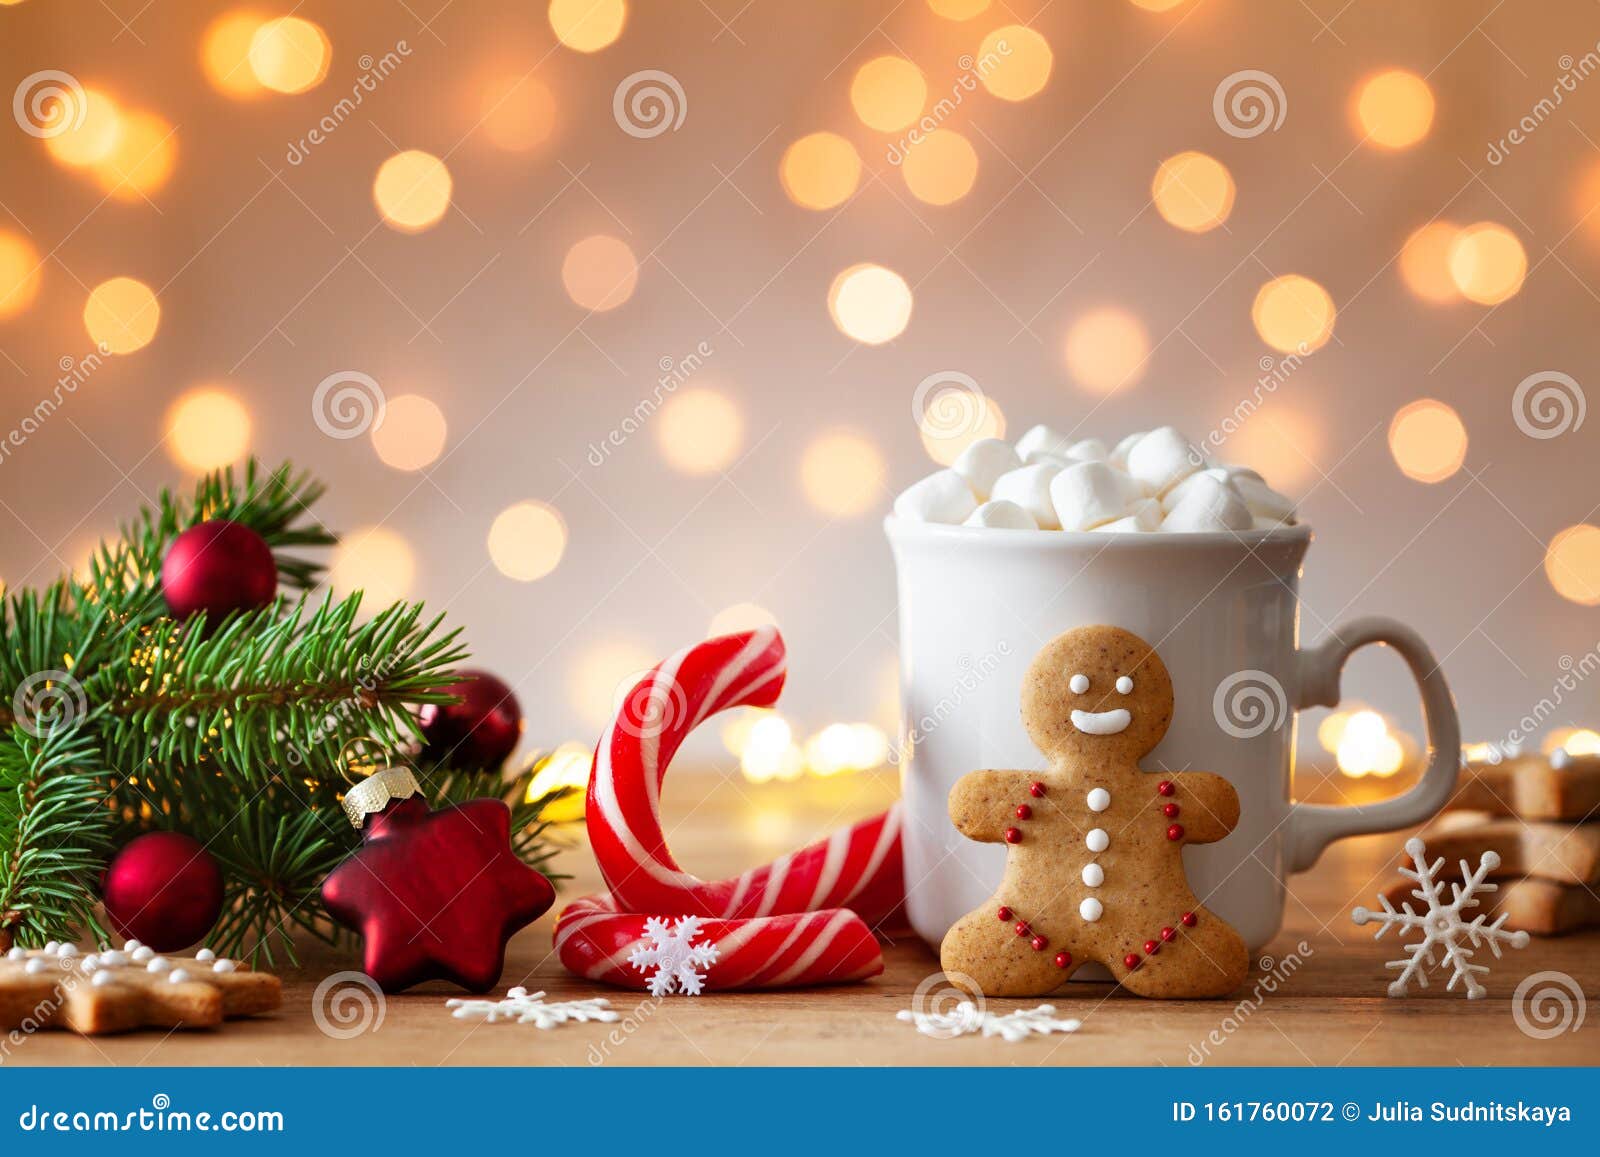 cozy wintertime scene. gingerbread man, cup of hot cocoa with marshmallow and christmas fir branch